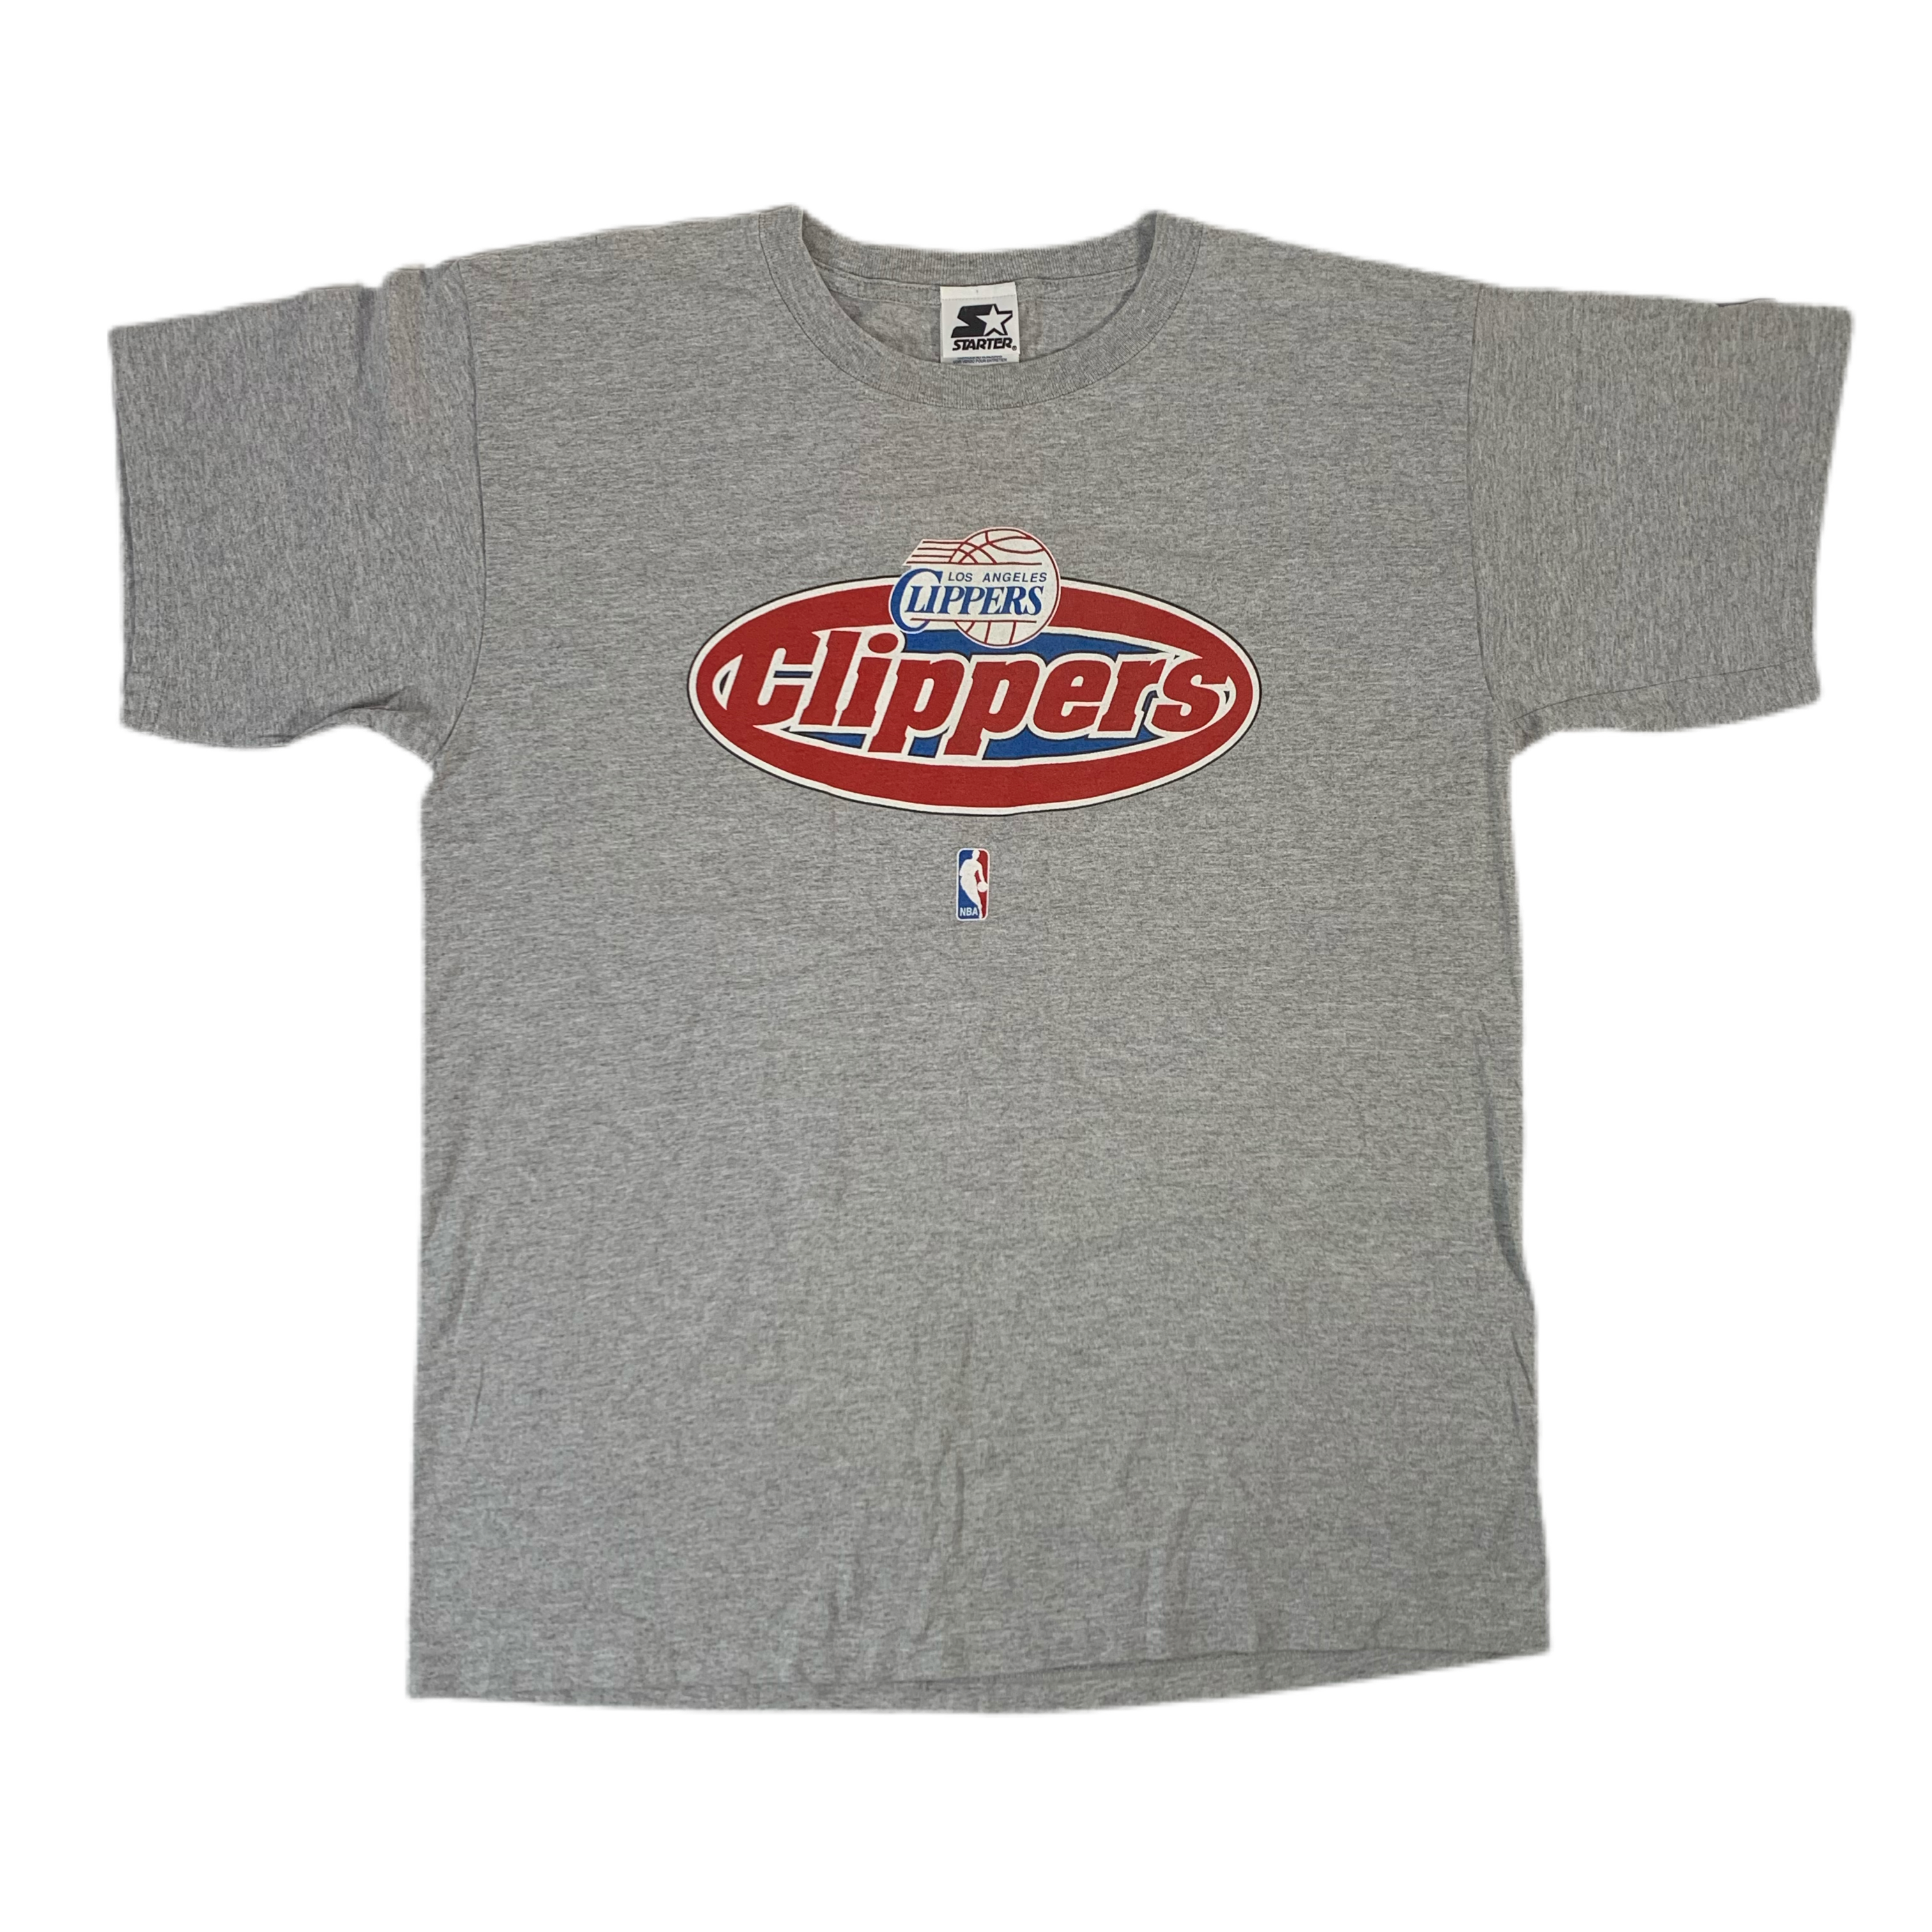 Vintage Clippers NBA Jersey